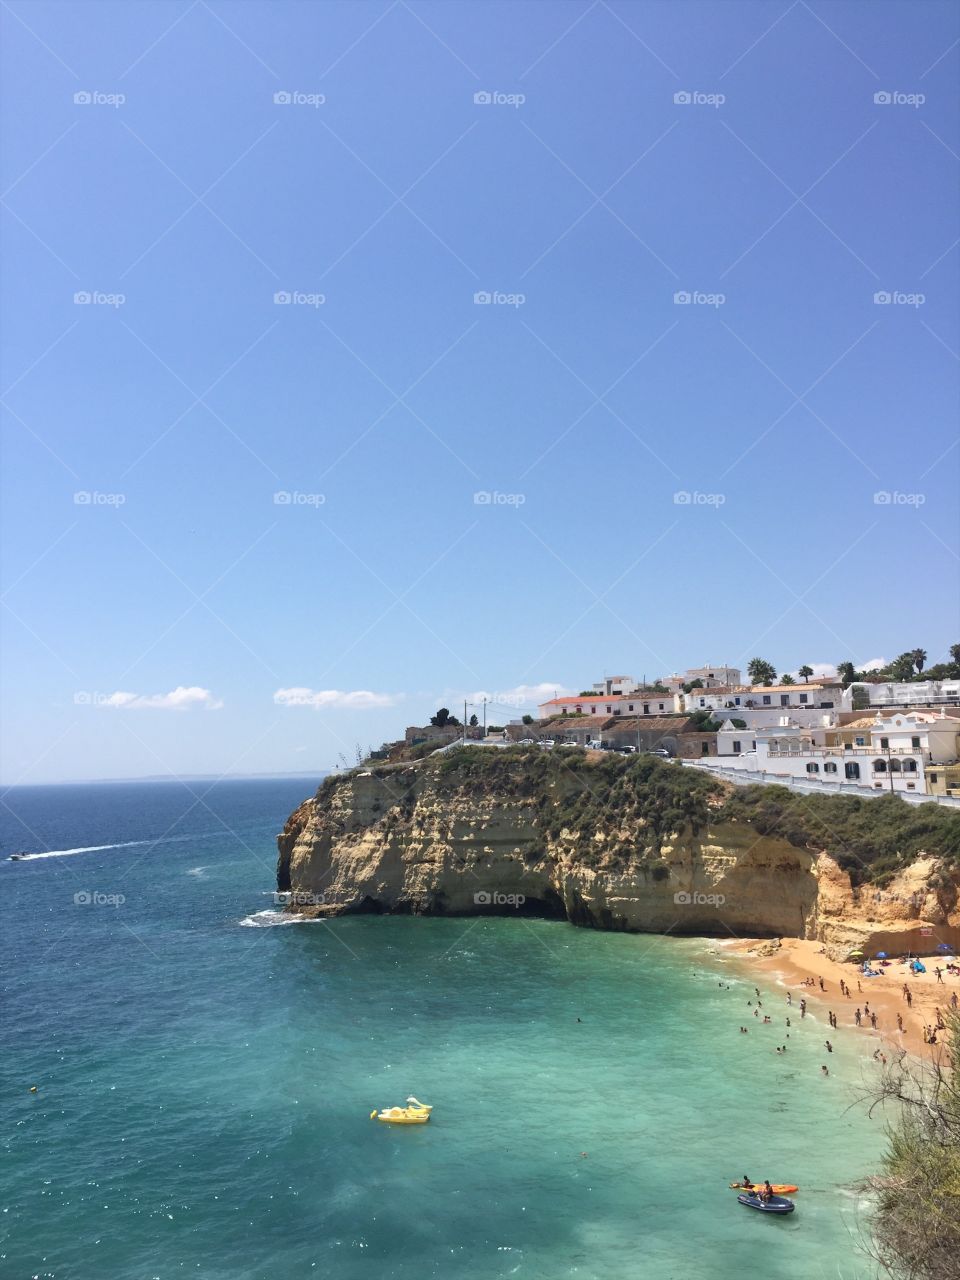 A stunning image of the rocky beaches of the Algarve coastline in southern Portugal, featuring a deep blue ocean and sunny blue skies.